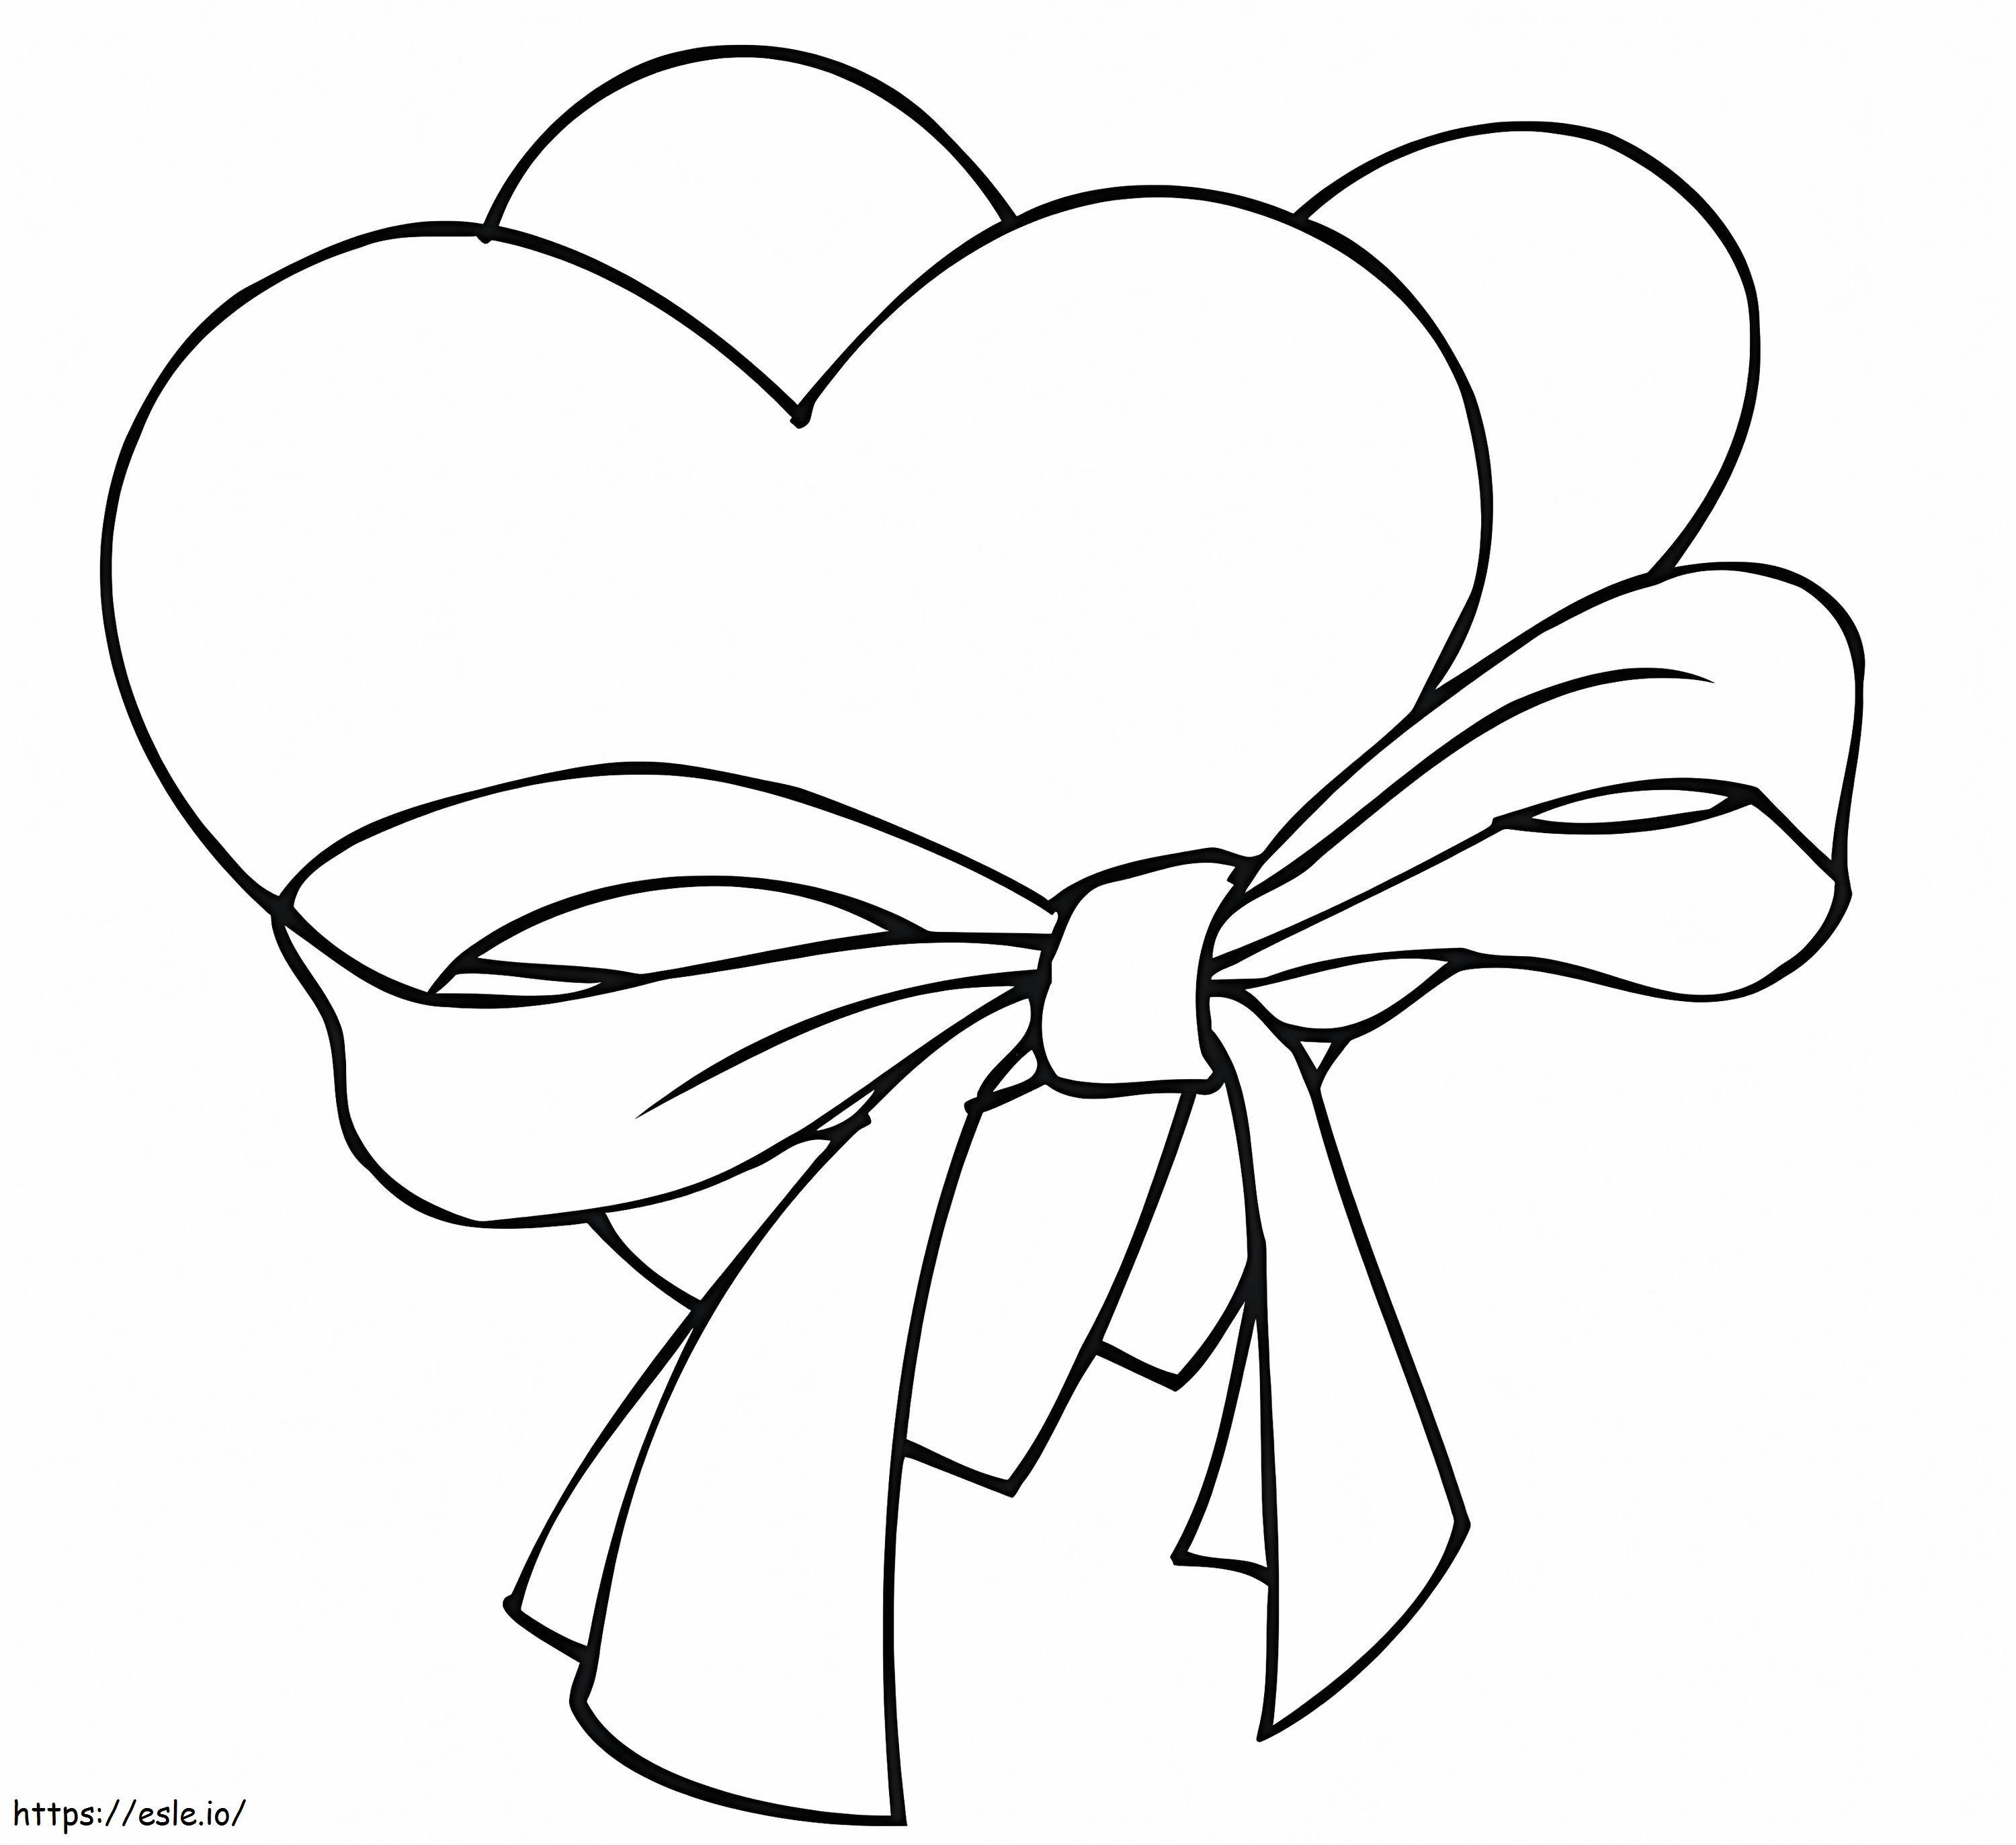 Valentine Hearts coloring page